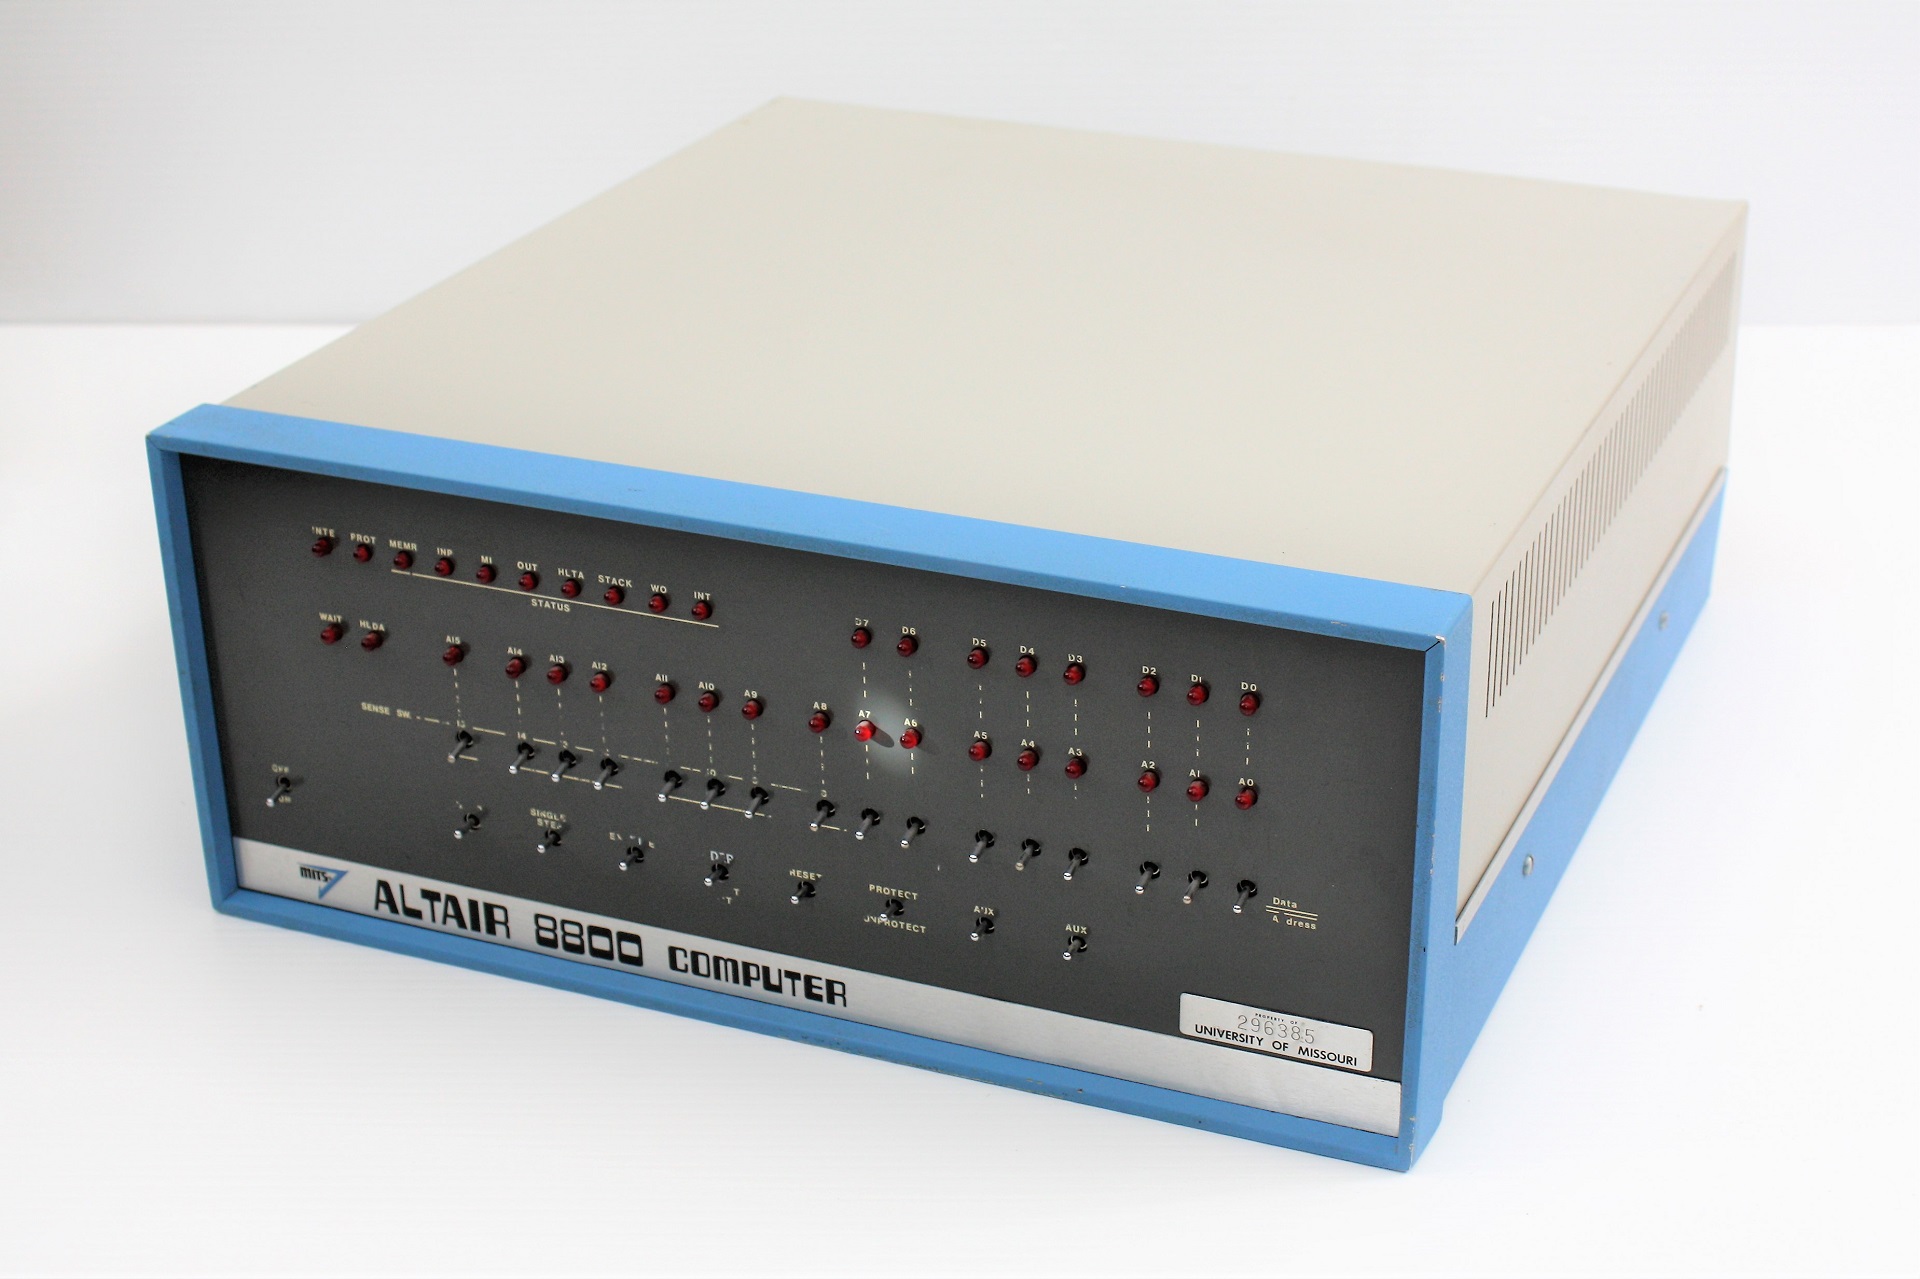 MITS Altair 8800 lost and found